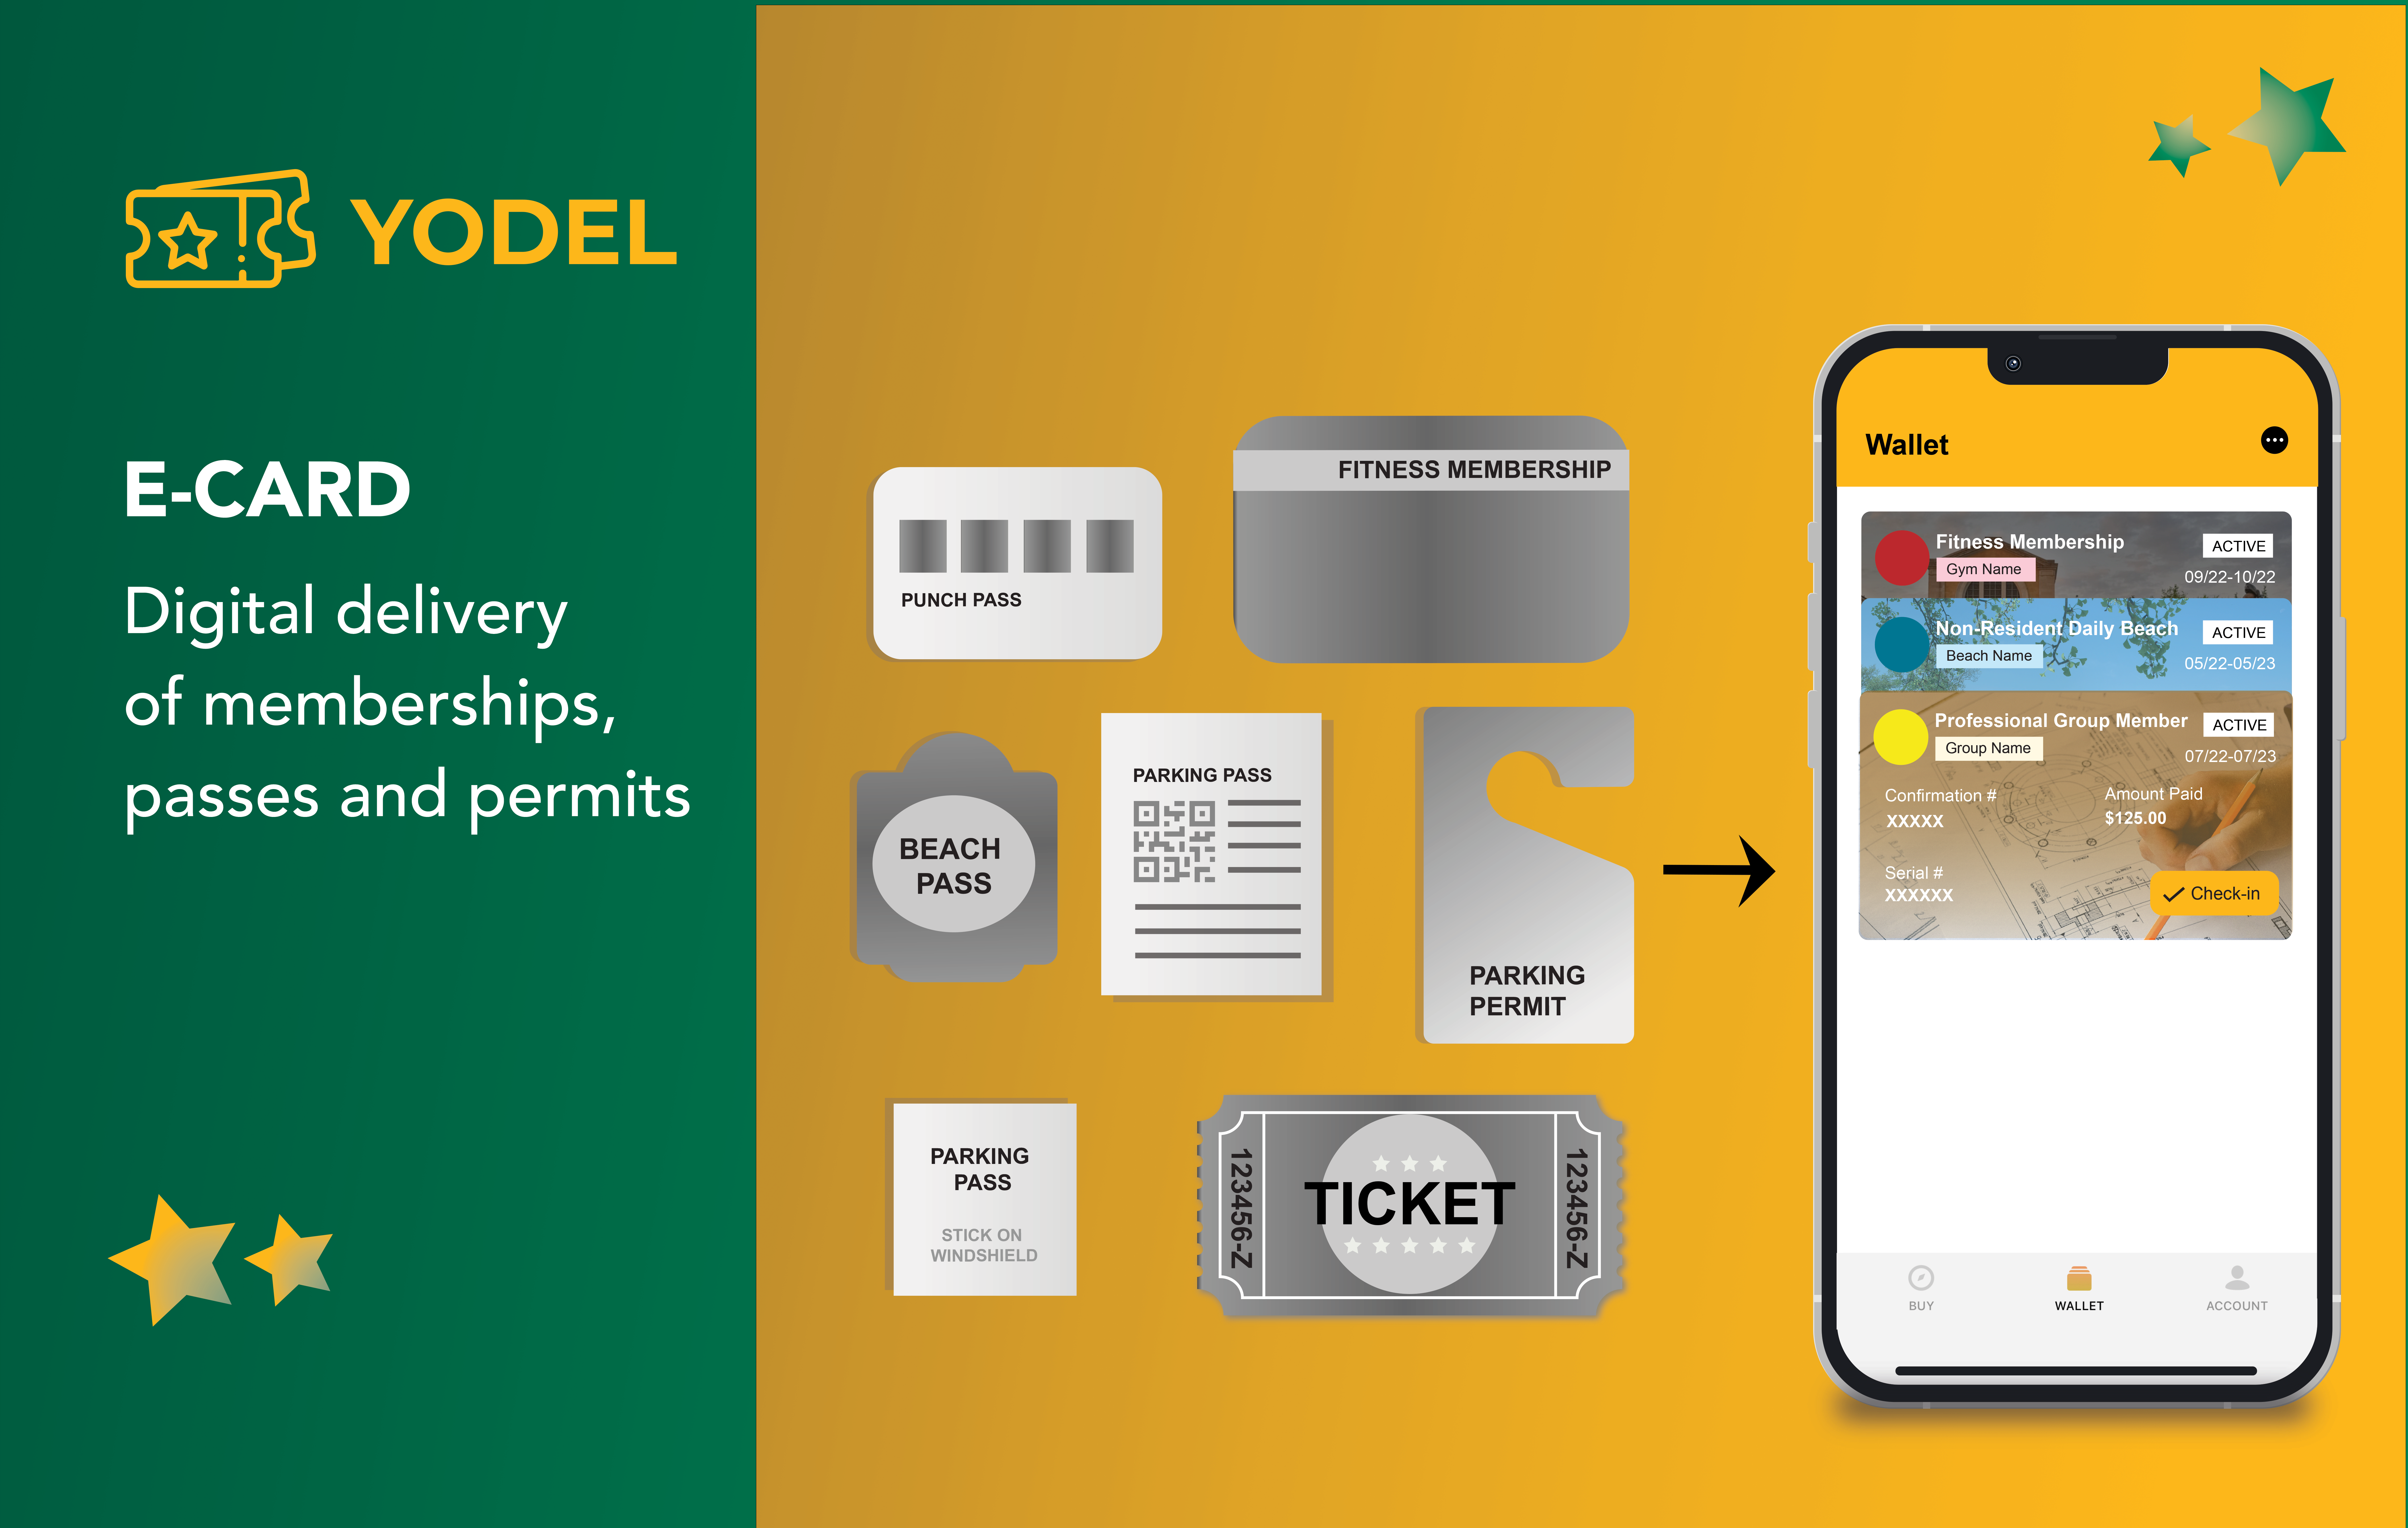 Yodel E-Card replaces paper and plastic cards with digital delivery of memberships, passes, and permits